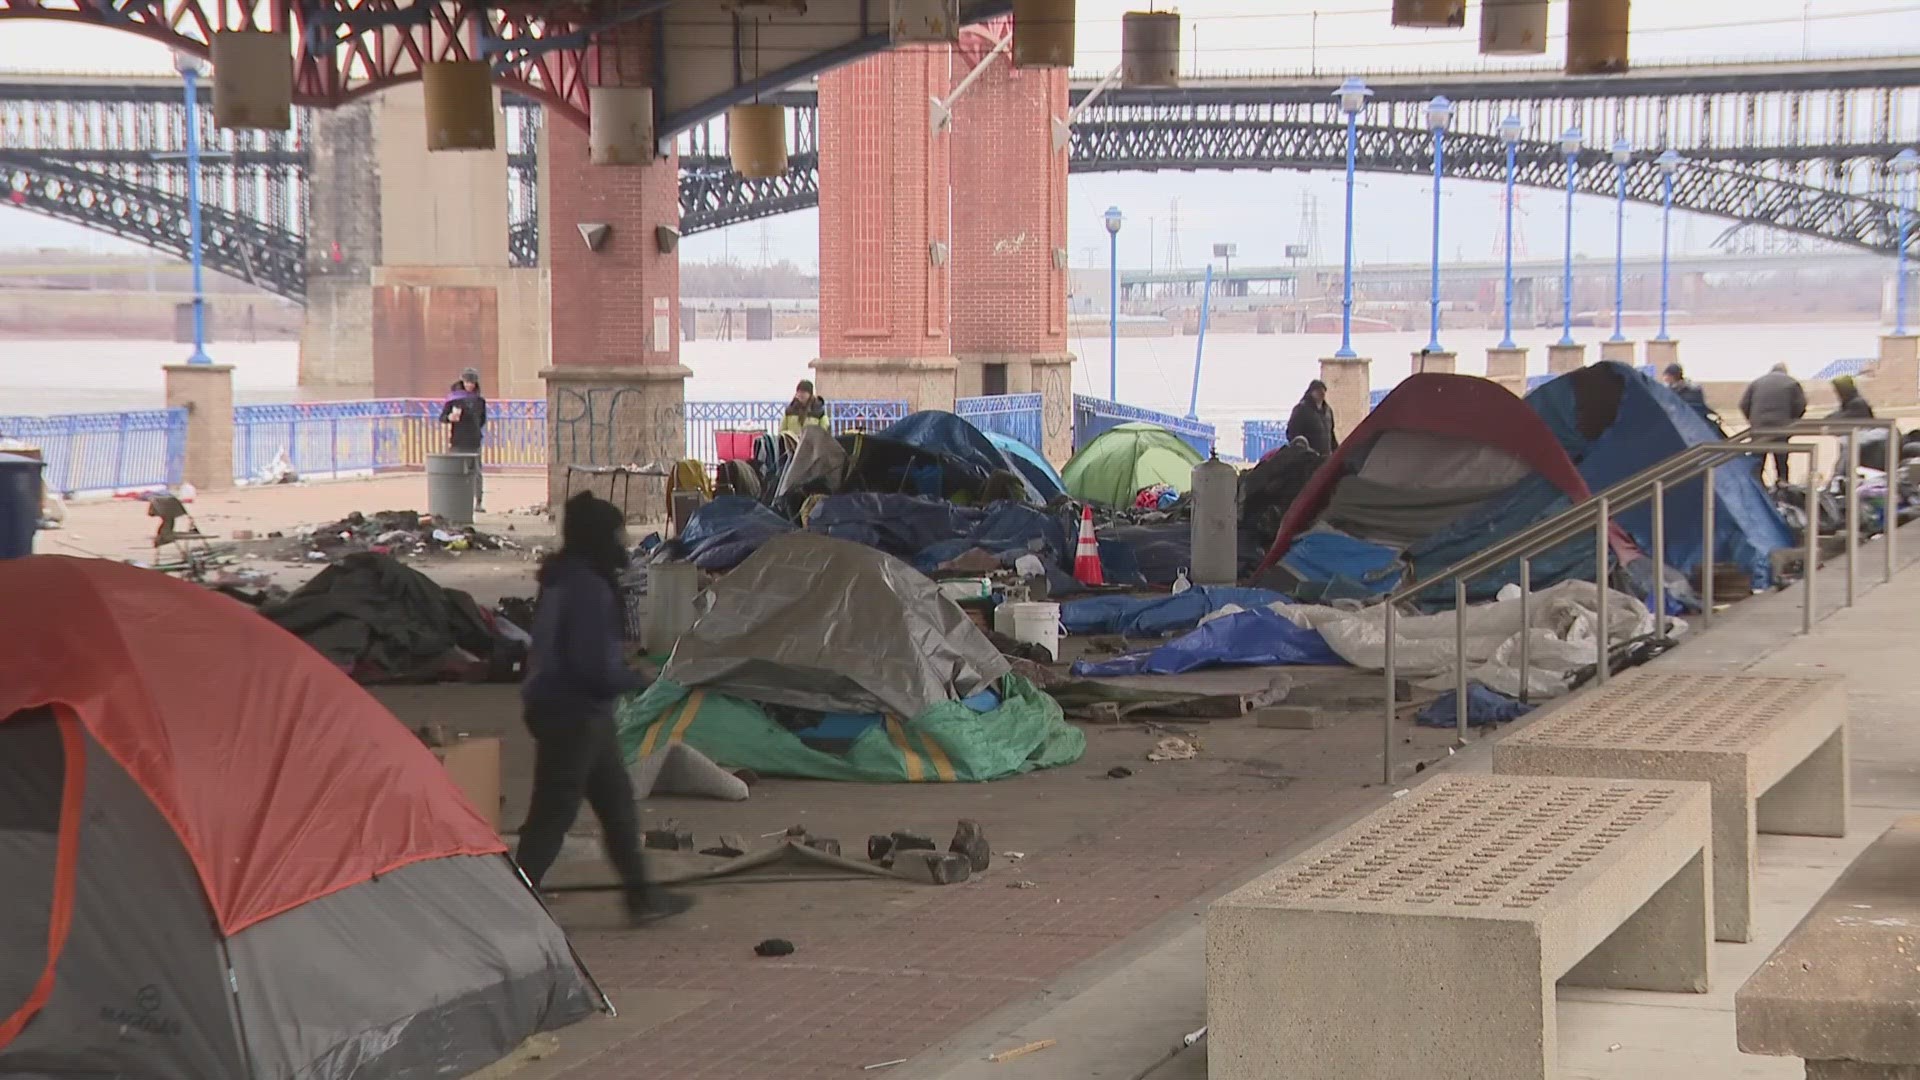 Abstract Marketing Group is one business complaining about the homeless encampment. The St. Louis mayor has not responded despite several attempts at contact.